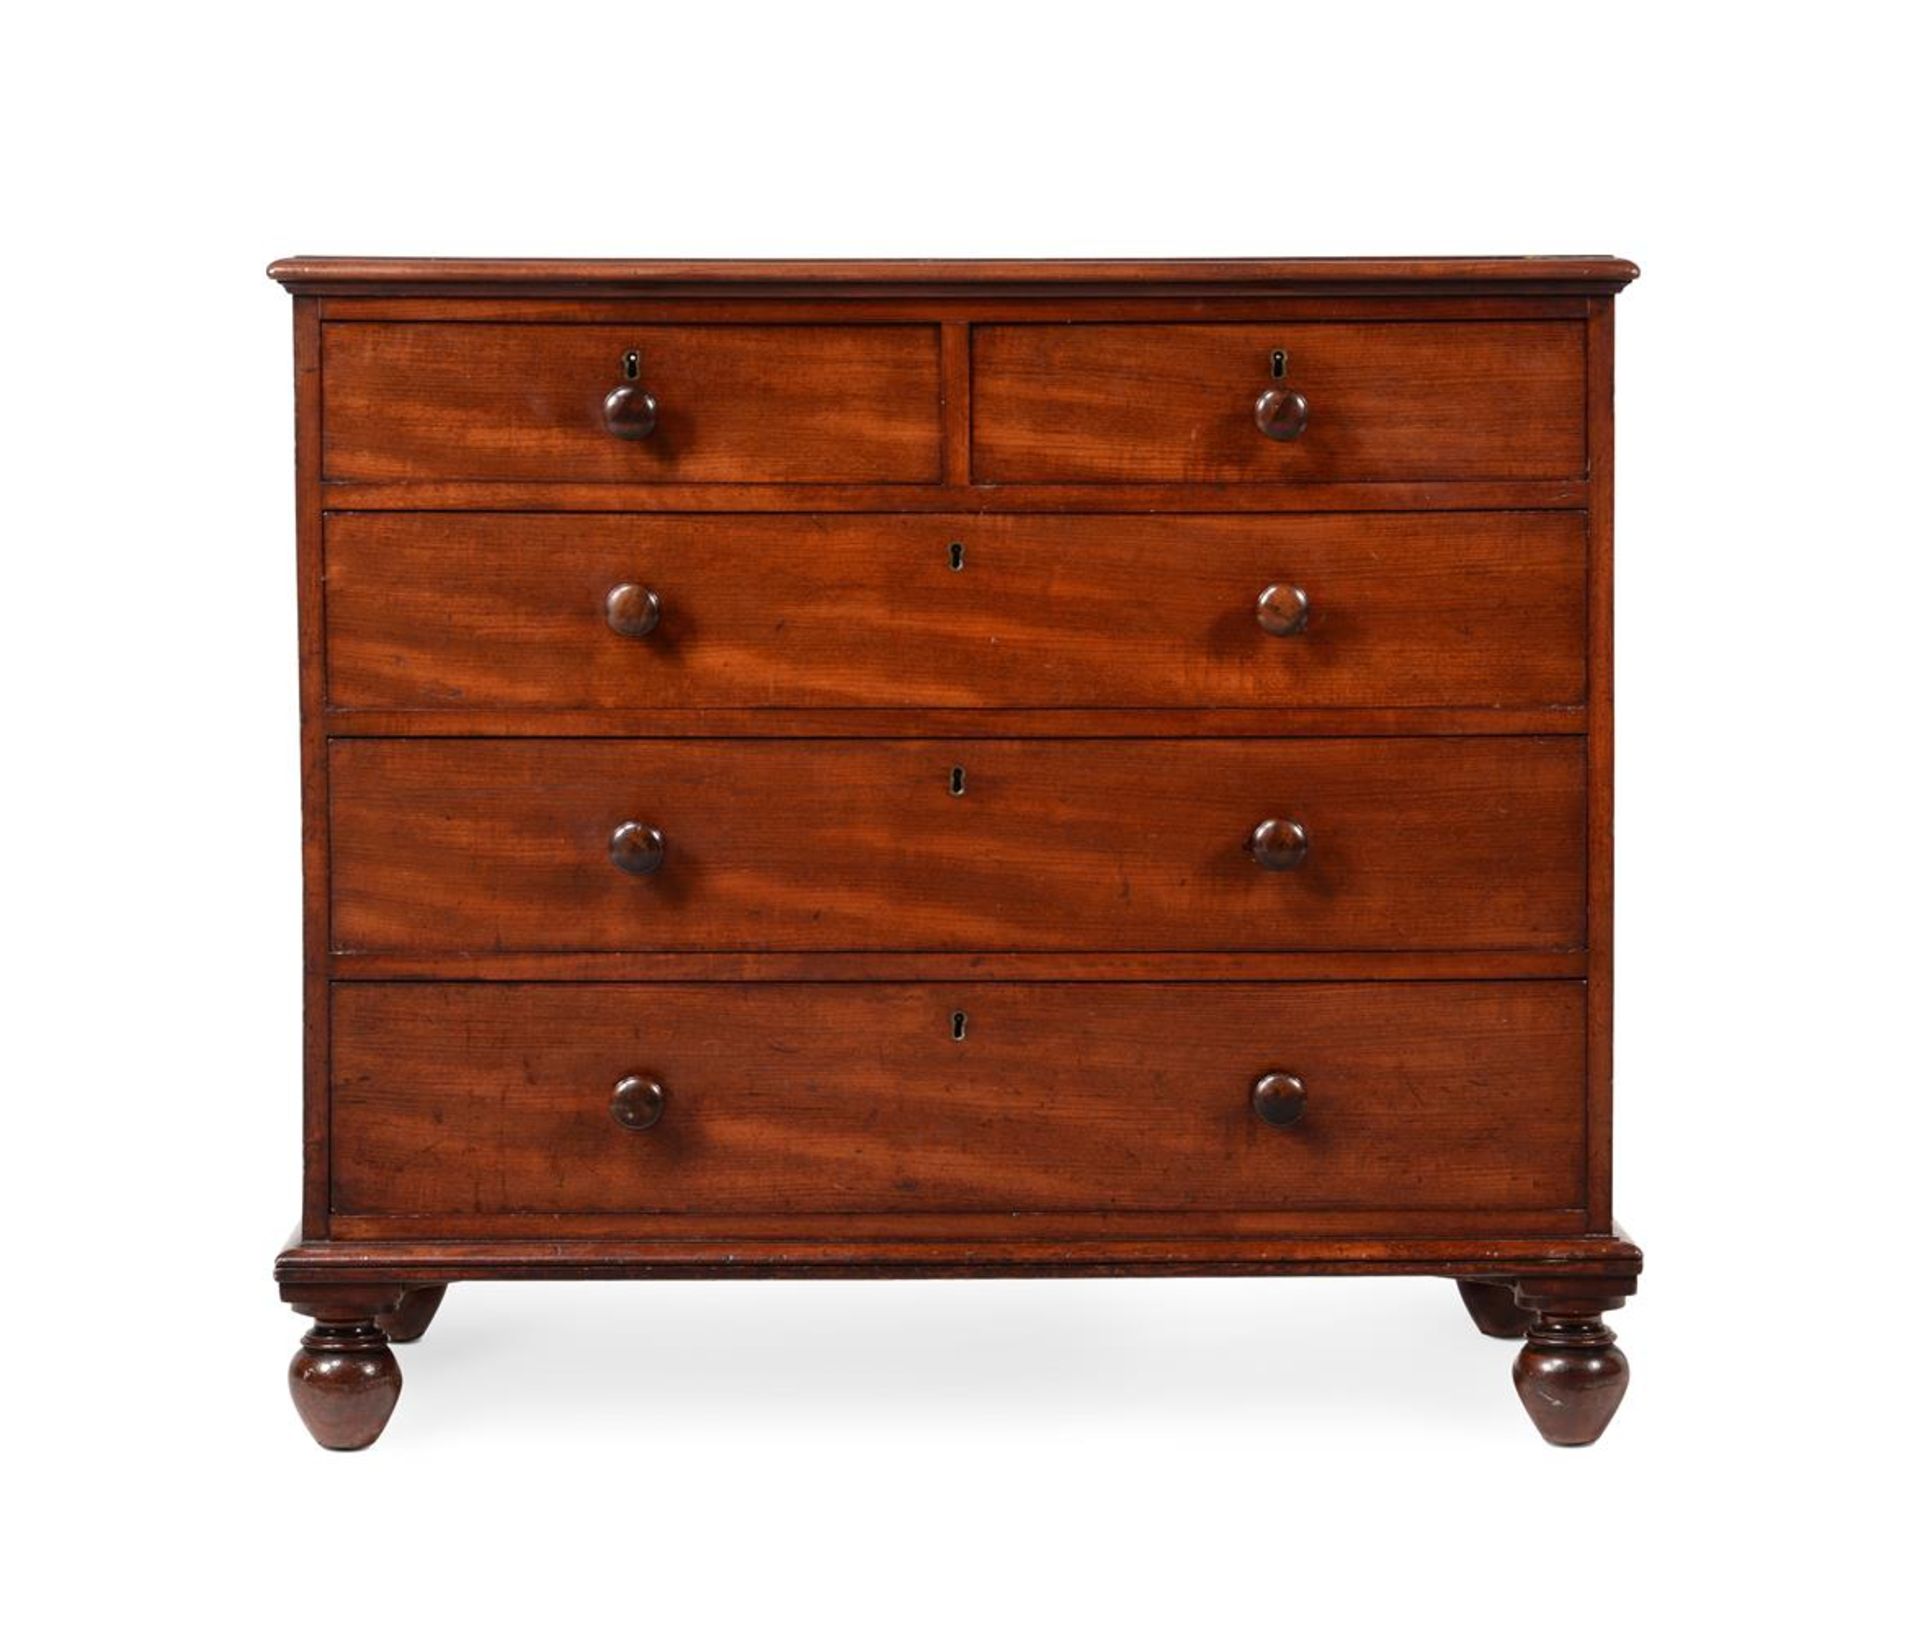 Y AN EARLY VICTORIAN MAHOGANY CHEST OF DRAWERS, BY GILLOW, CIRCA 1851